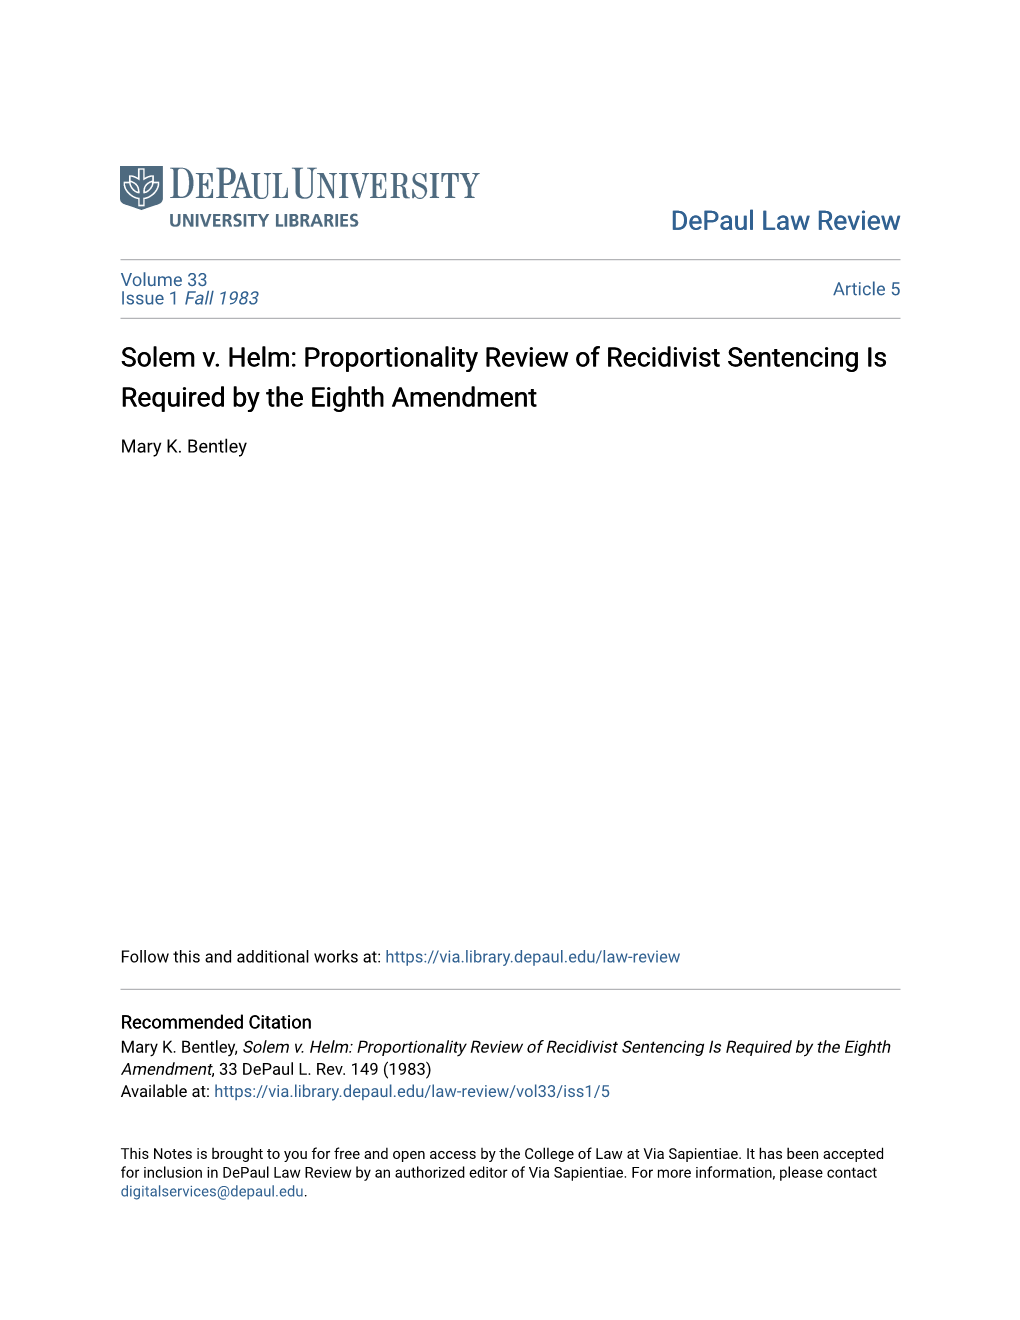 Solem V. Helm: Proportionality Review of Recidivist Sentencing Is Required by the Eighth Amendment